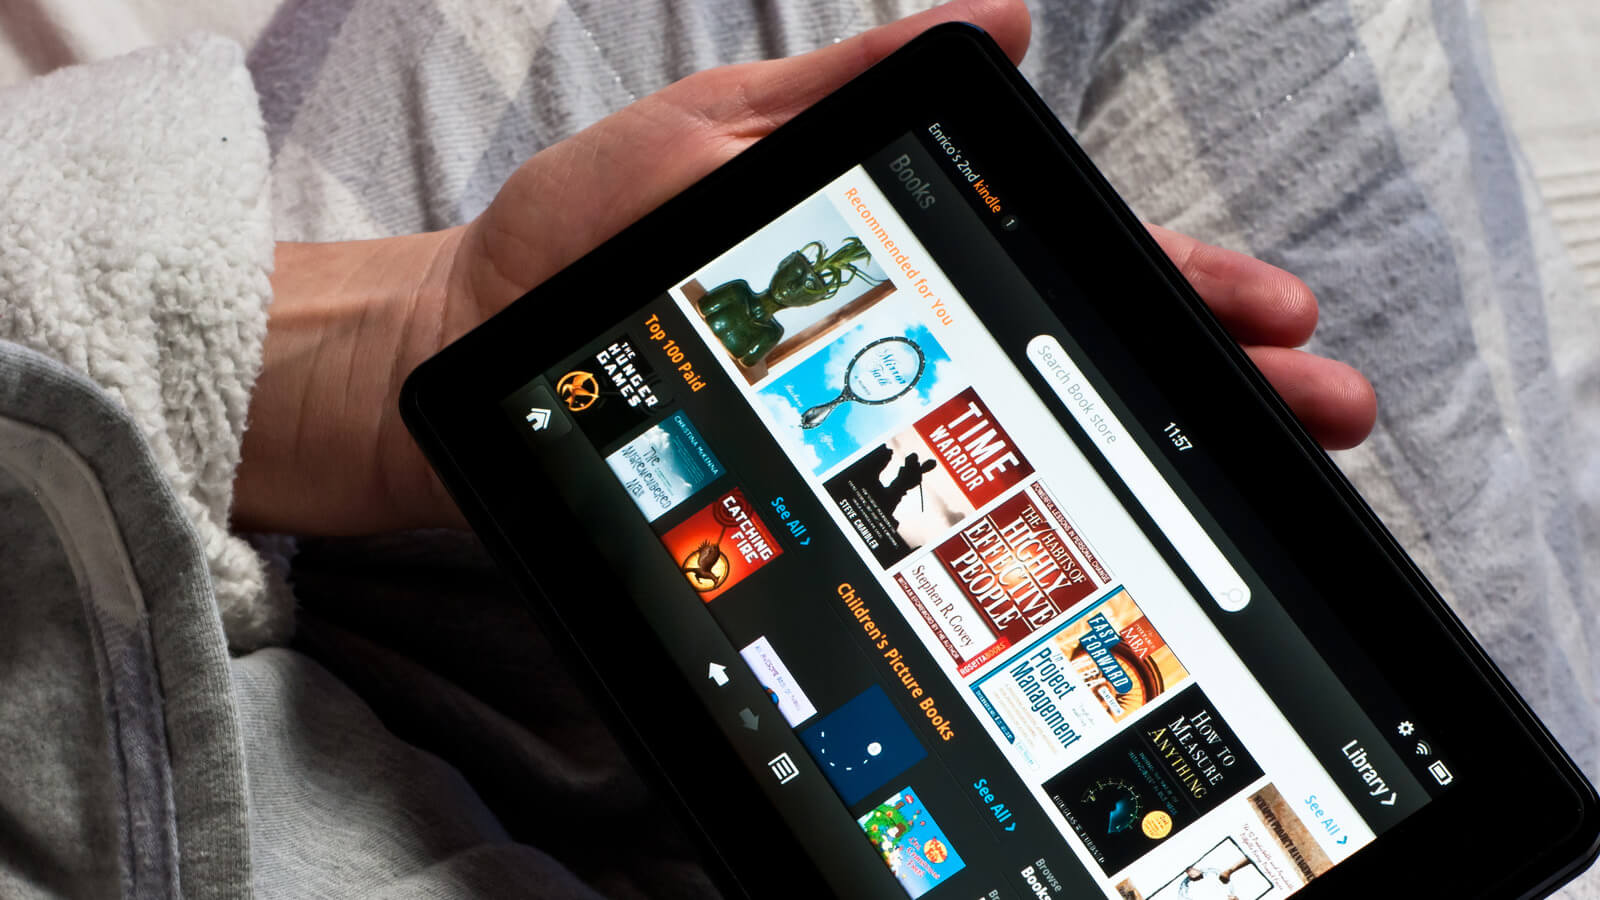 How To Make My Amazon Fire Tablet Faster